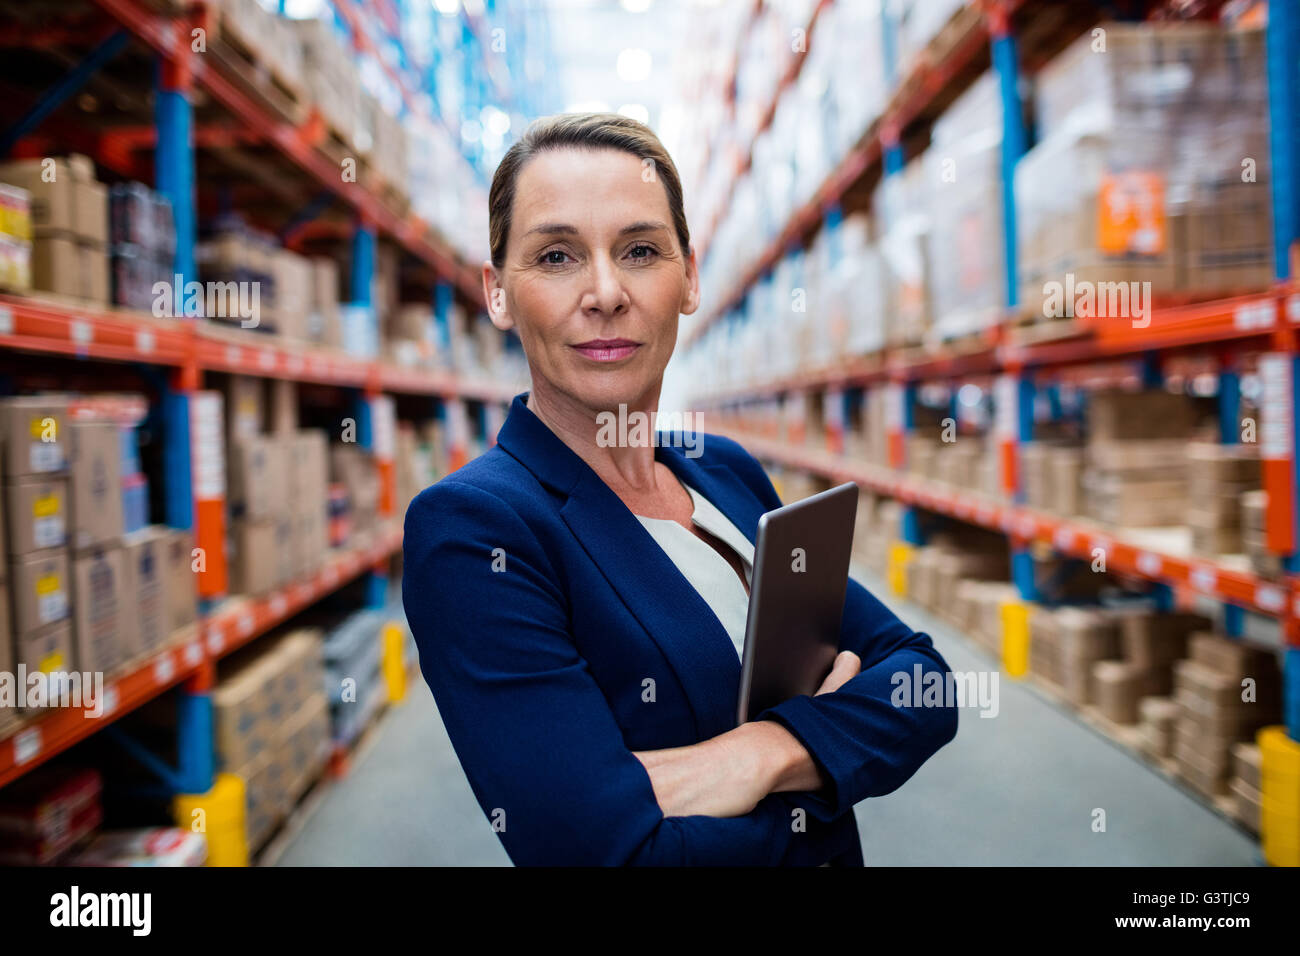 Portrait of warehouse manager standing Stock Photo